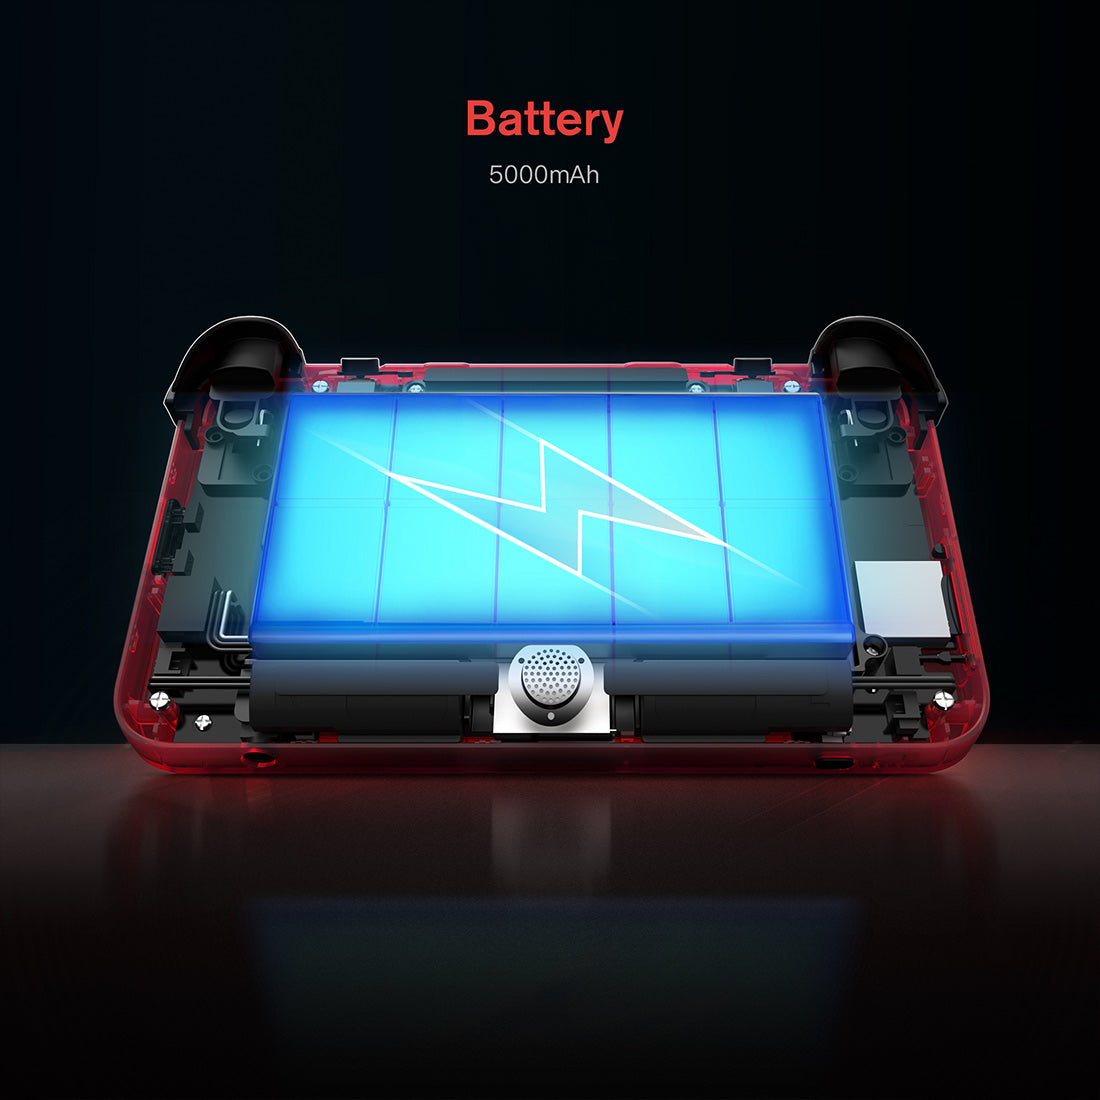 litnxt-Retroid-Pocket-Flip-Android-Handheld-Game-Console-10